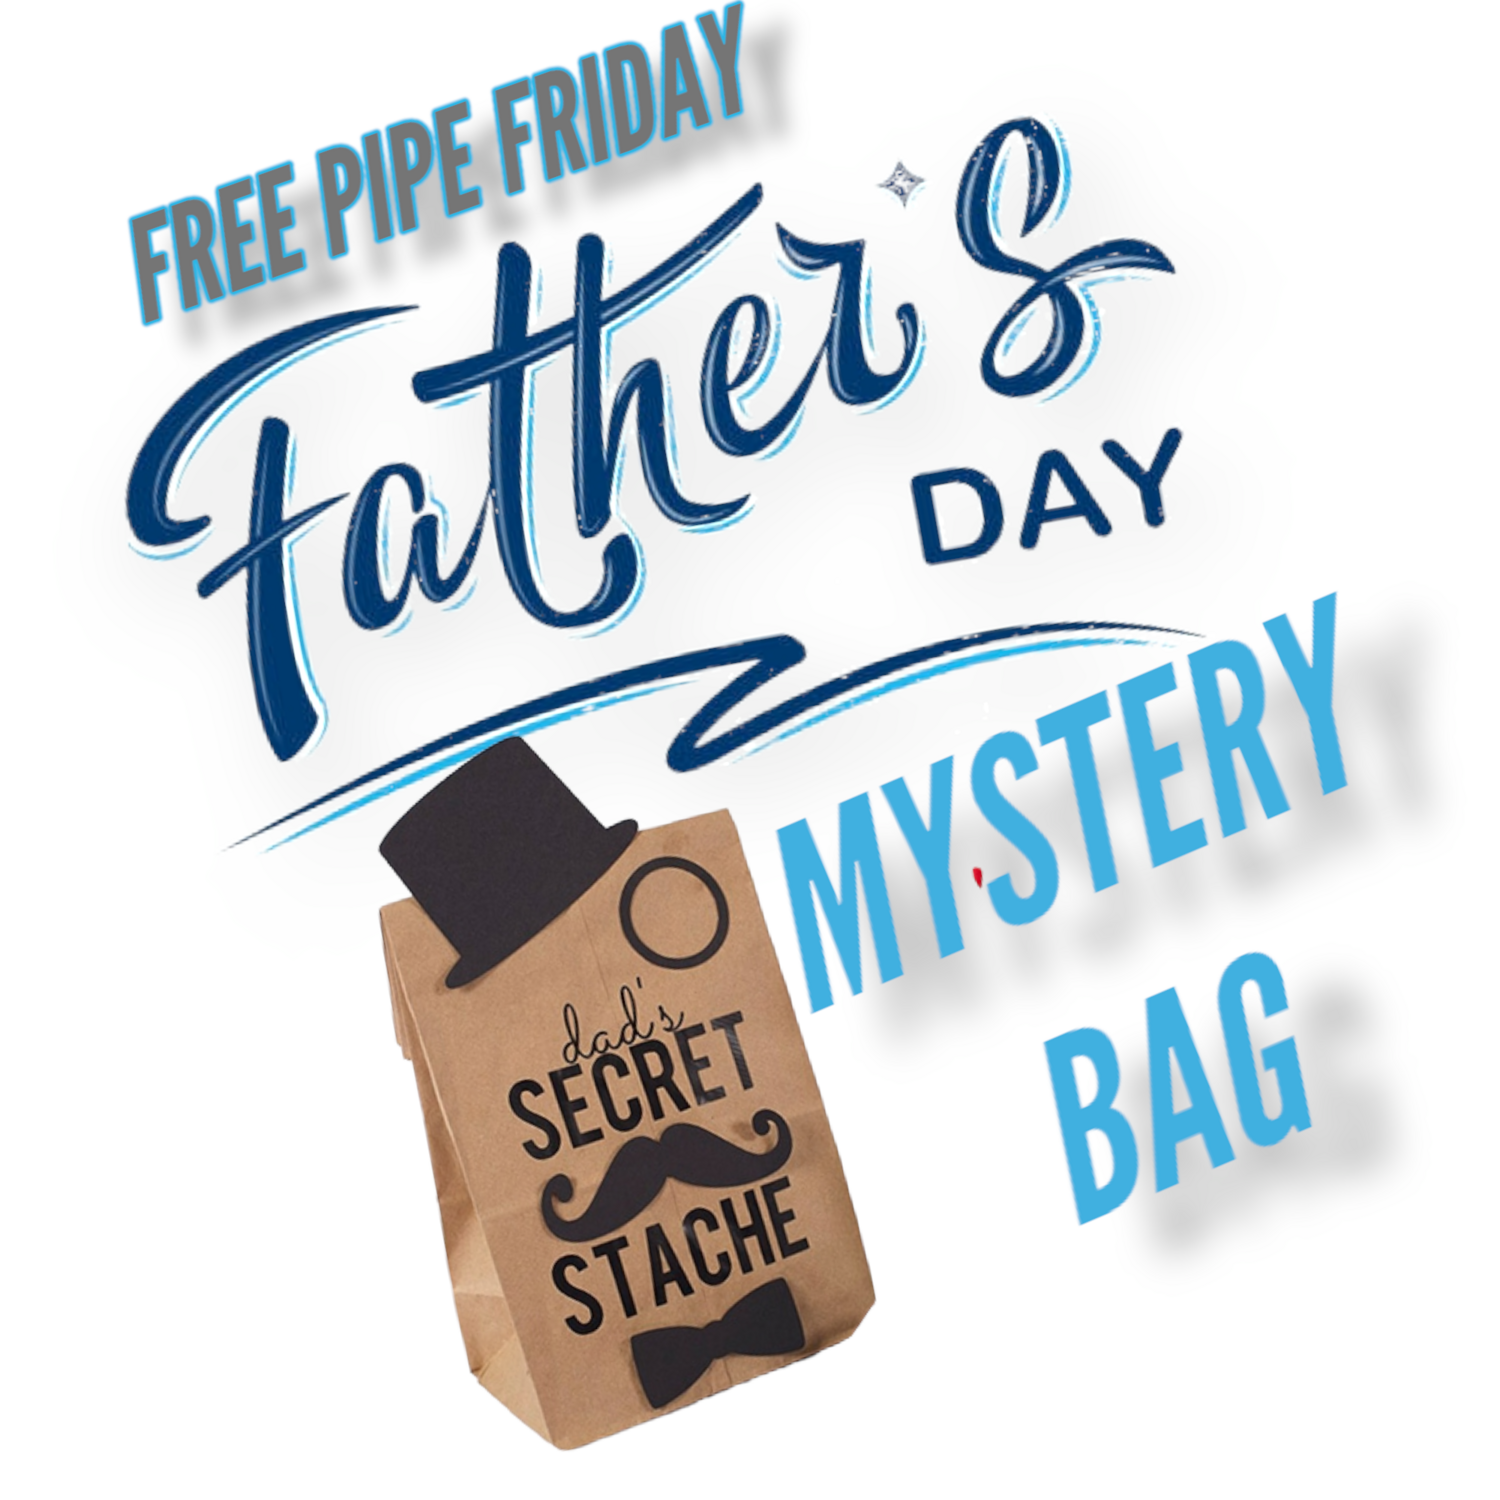 Free fathers day secert stache mystery  bag claim now to enter the golden ticket contest